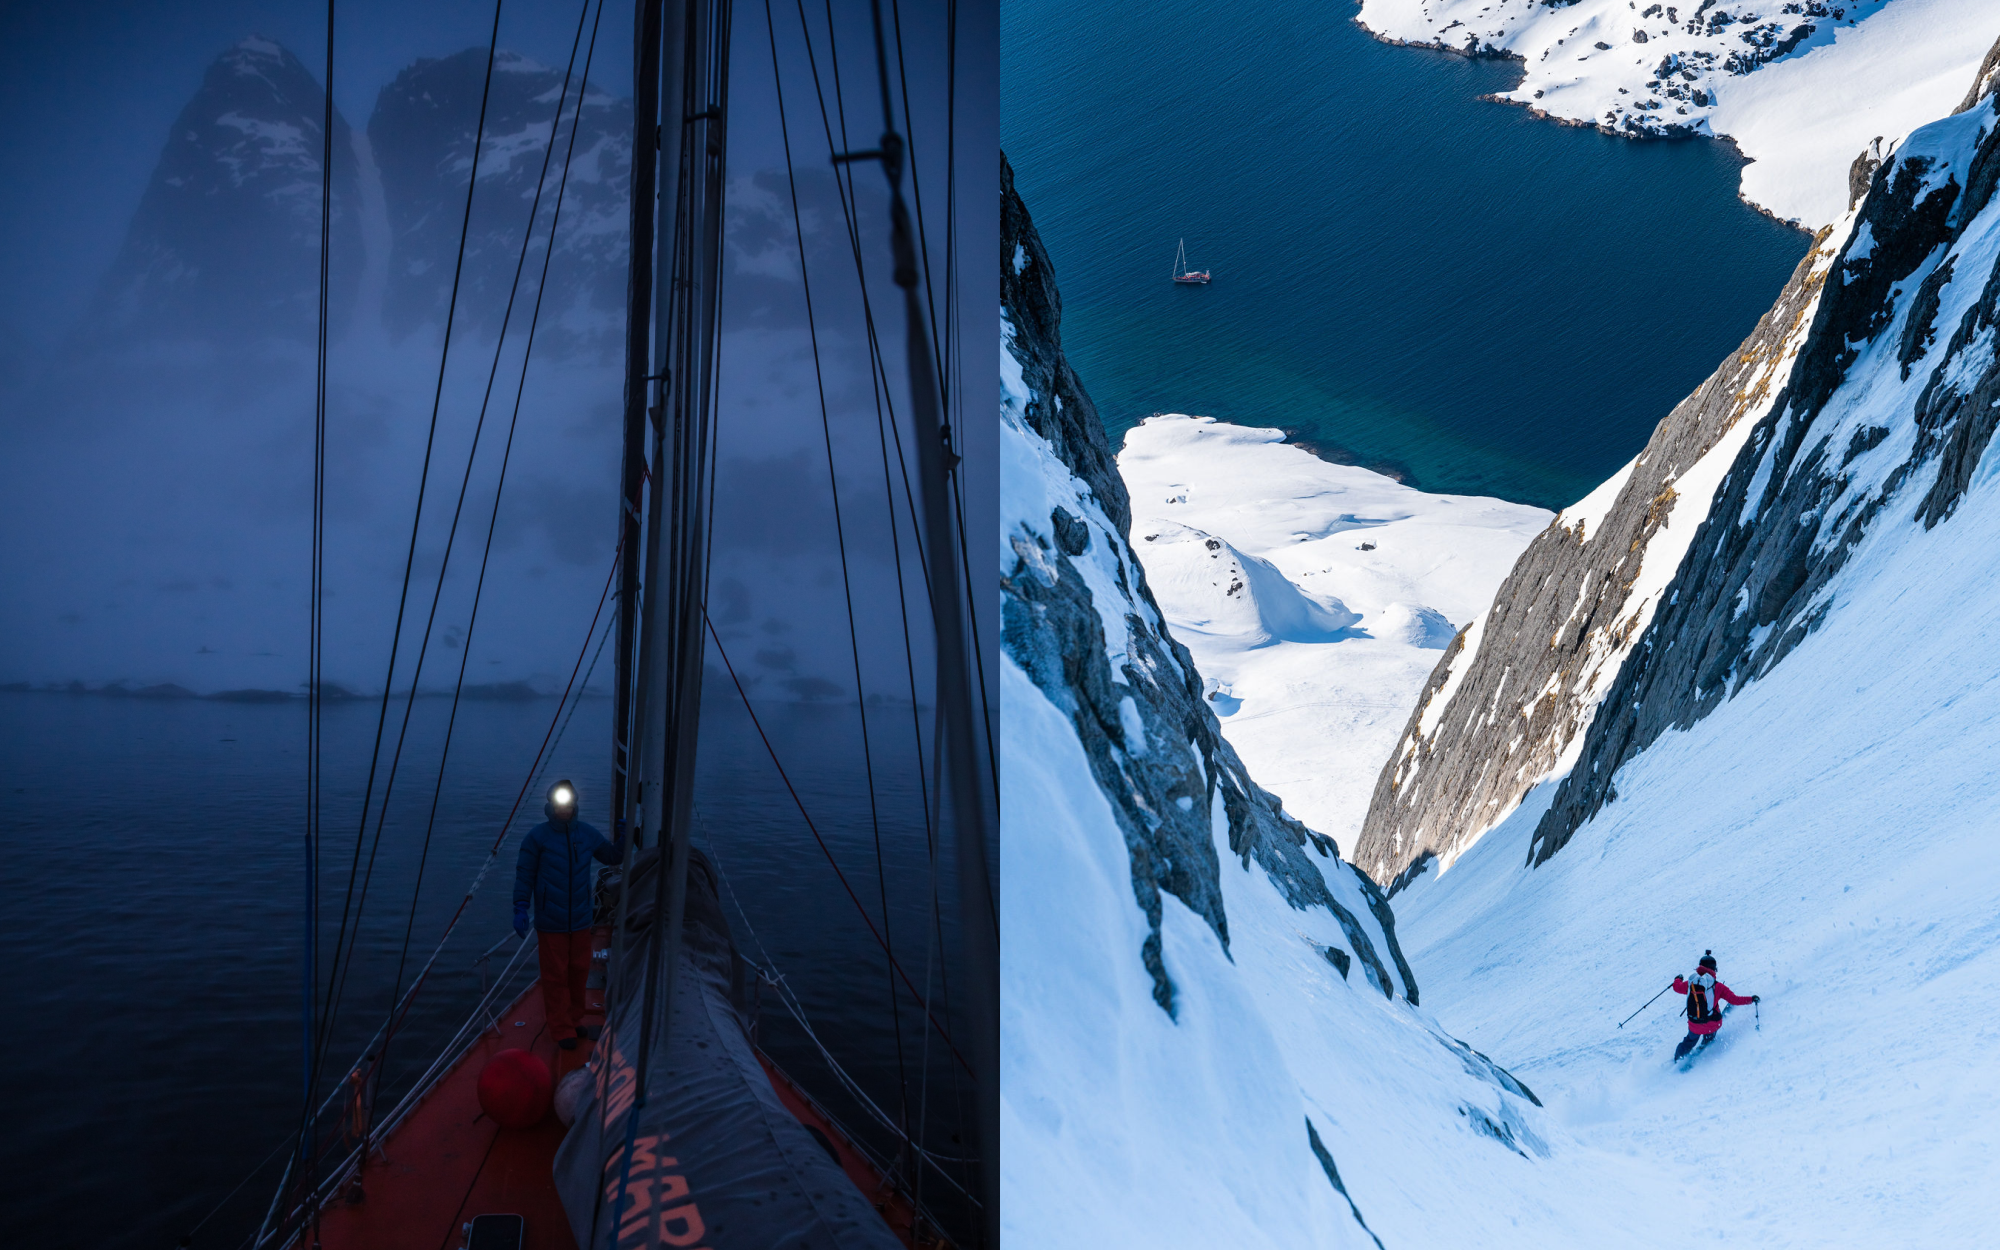 Side by side image of the sailboat at night alongside Rachael skiing down a carvass. 